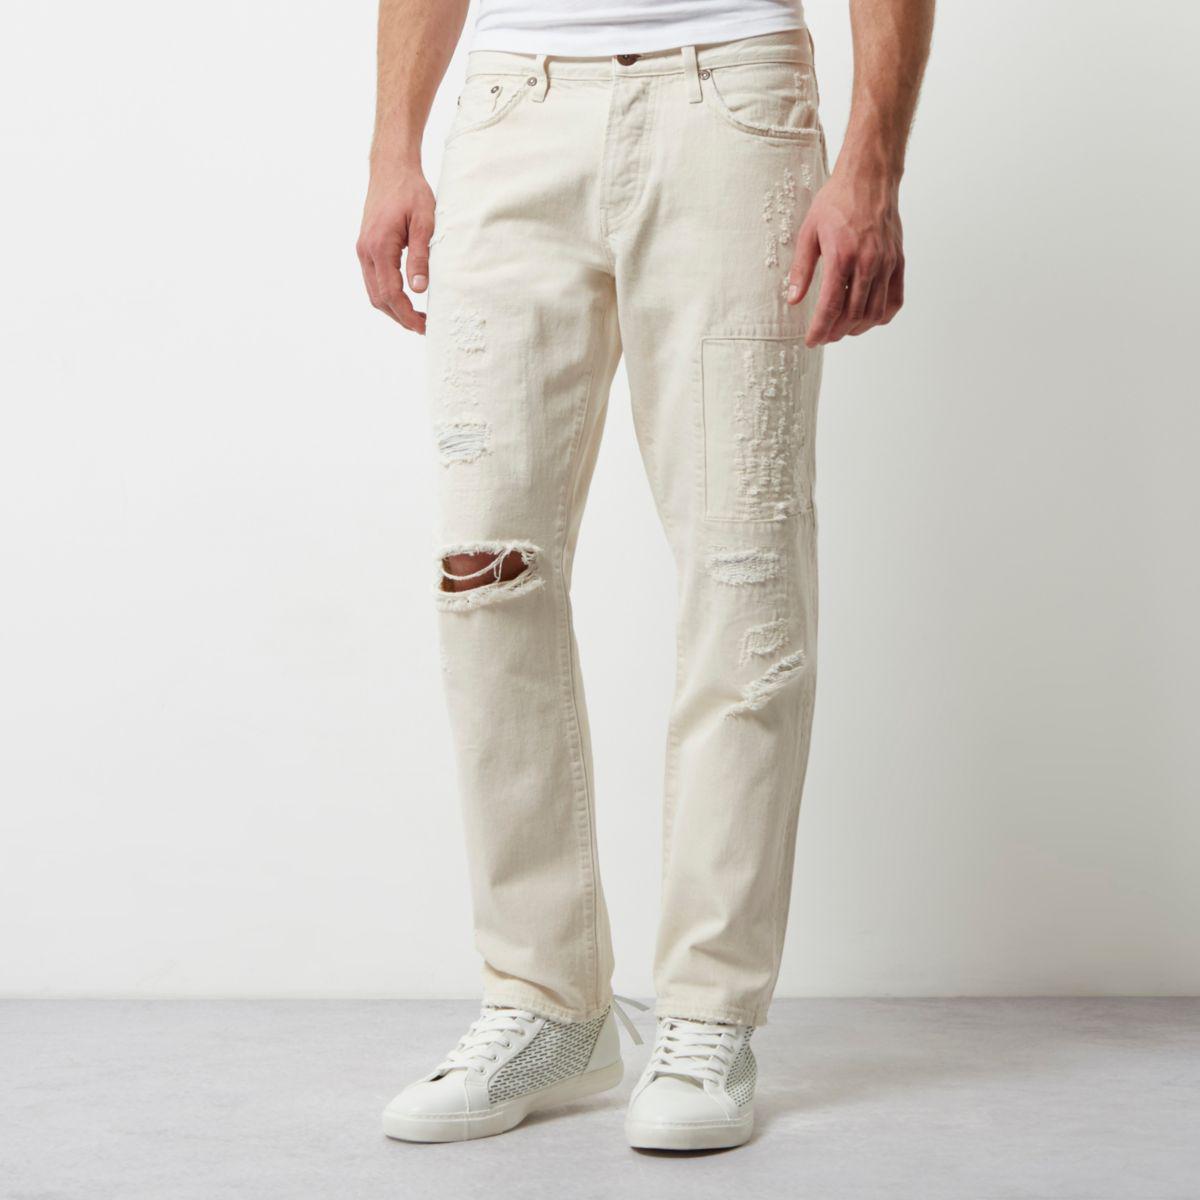 Lyst - River Island White Wash Distressed Loose Fit Cody Jeans in White ...